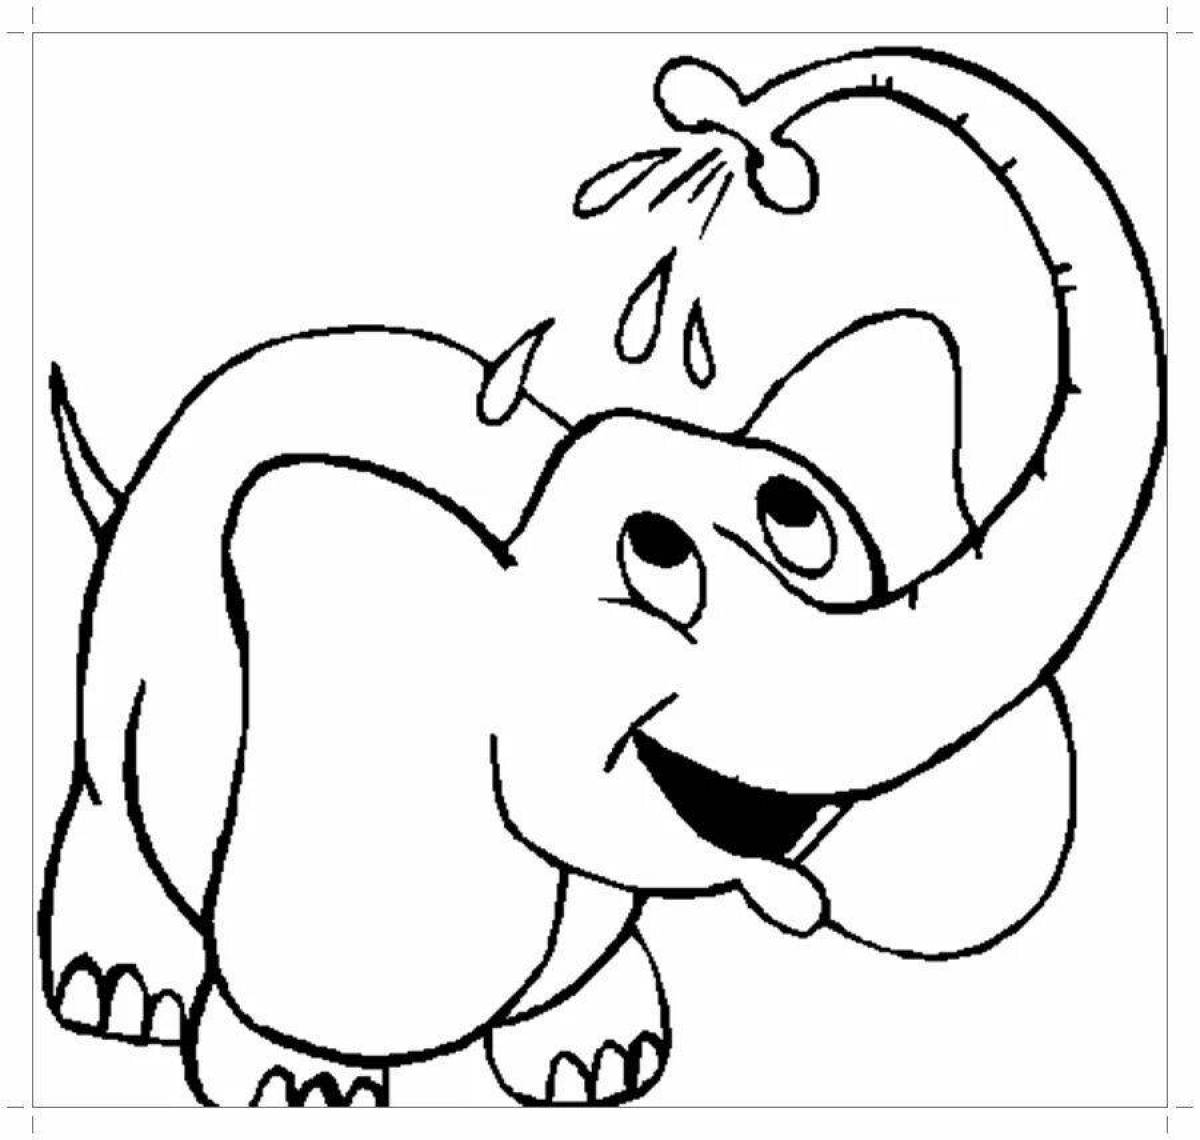 Gorgeous pink elephant coloring page